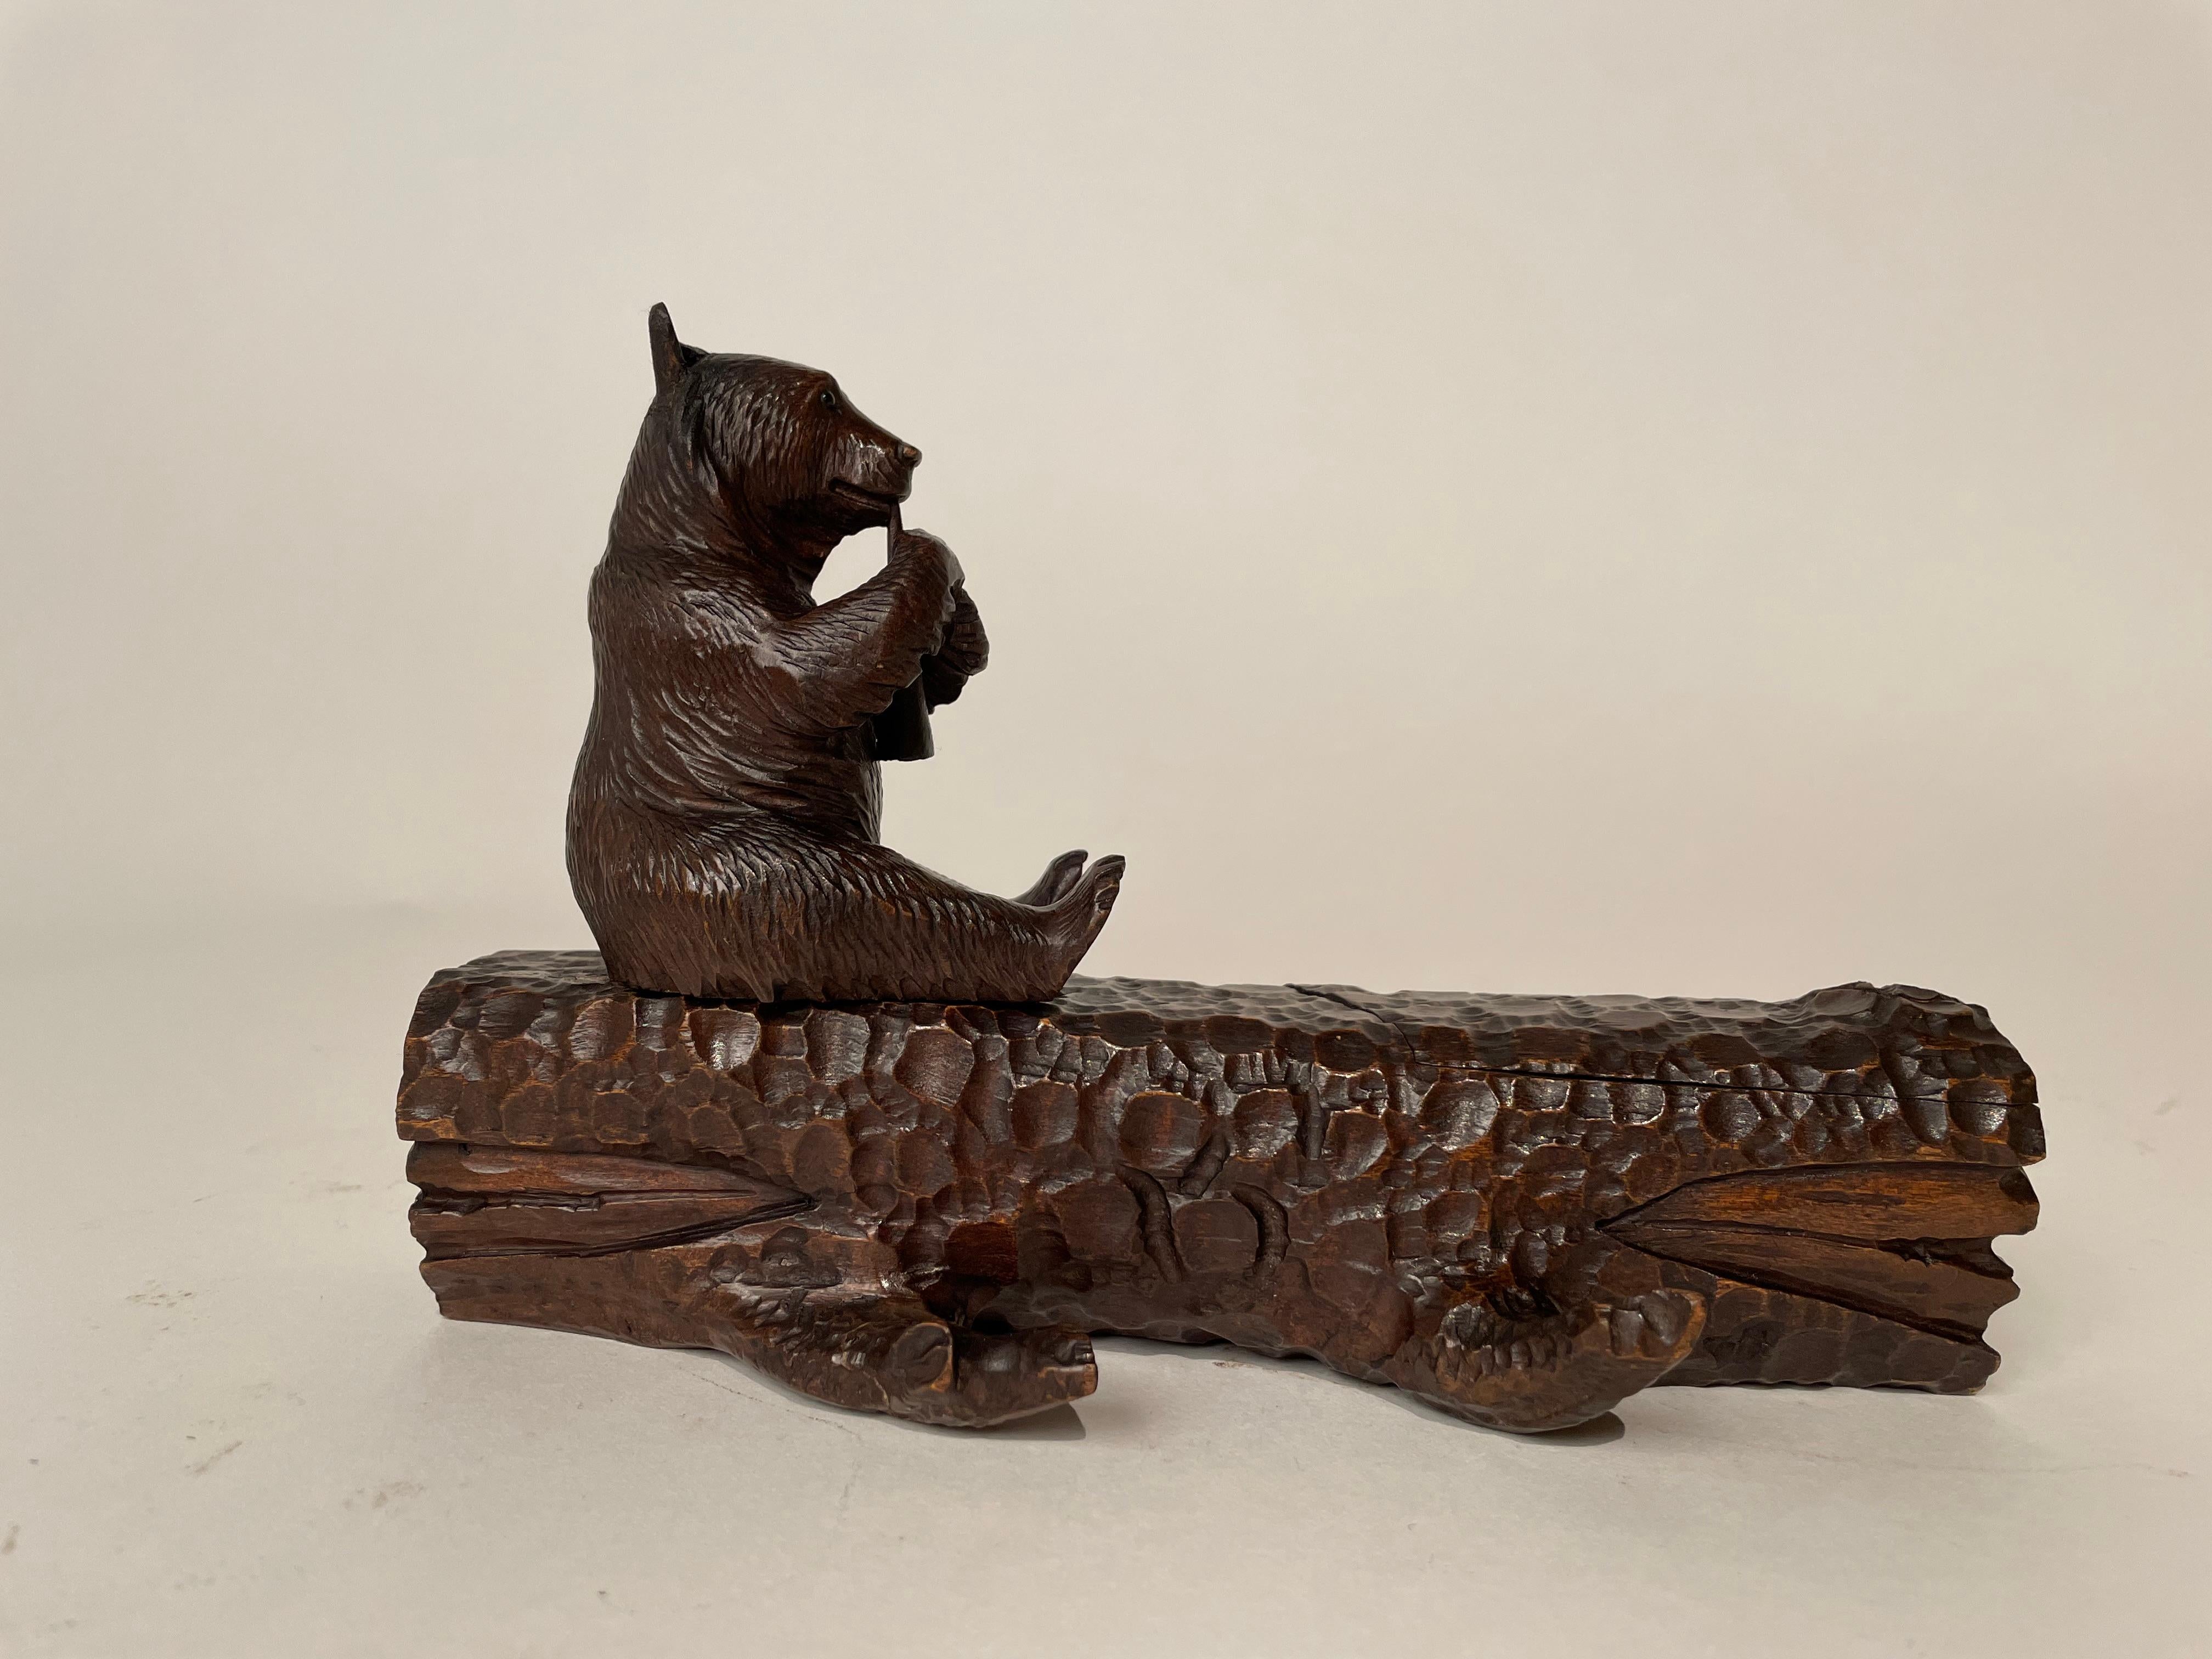 Charming black forest carving of a bear playing the flute seated om a log. The log opens on one end to reveal a glass inkwell, and the bear swivels to an opening to store pen nibs. Beautifully conceived design by a master carver. A fine example of